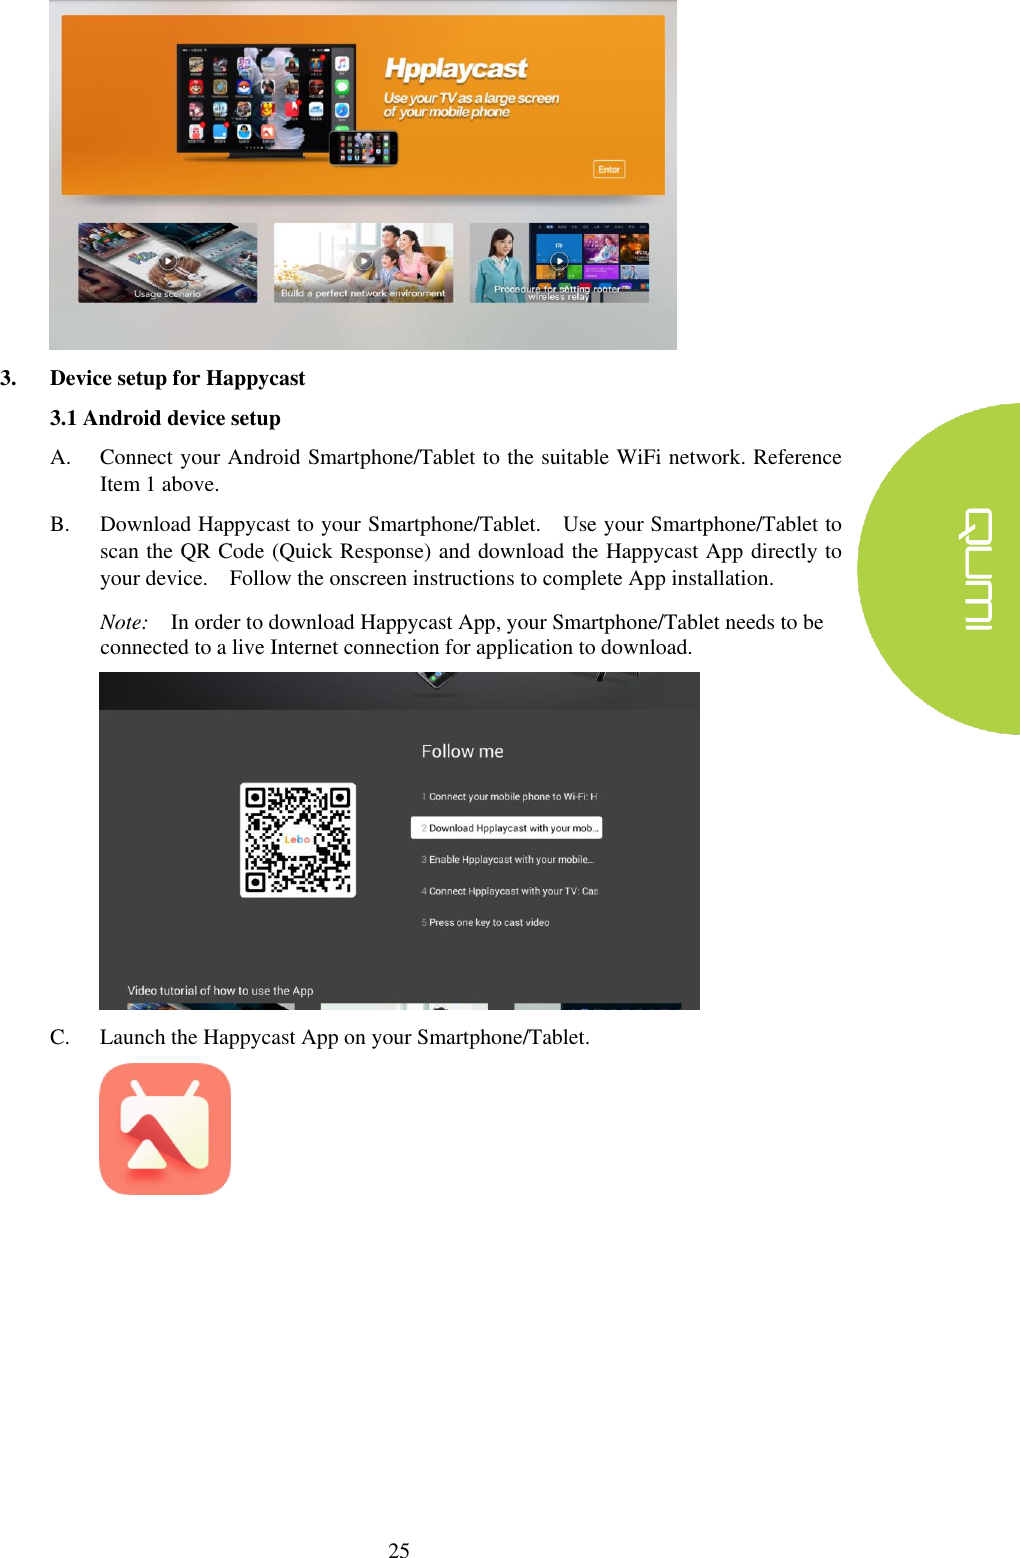  25  3. Device setup for Happycast 3.1 Android device setup A. Connect your Android Smartphone/Tablet to the suitable WiFi network. Reference Item 1 above. B. Download Happycast to your Smartphone/Tablet.    Use your Smartphone/Tablet to scan the QR Code (Quick Response) and download the Happycast App directly to your device.    Follow the onscreen instructions to complete App installation. Note:  In order to download Happycast App, your Smartphone/Tablet needs to be connected to a live Internet connection for application to download.      C. Launch the Happycast App on your Smartphone/Tablet.         